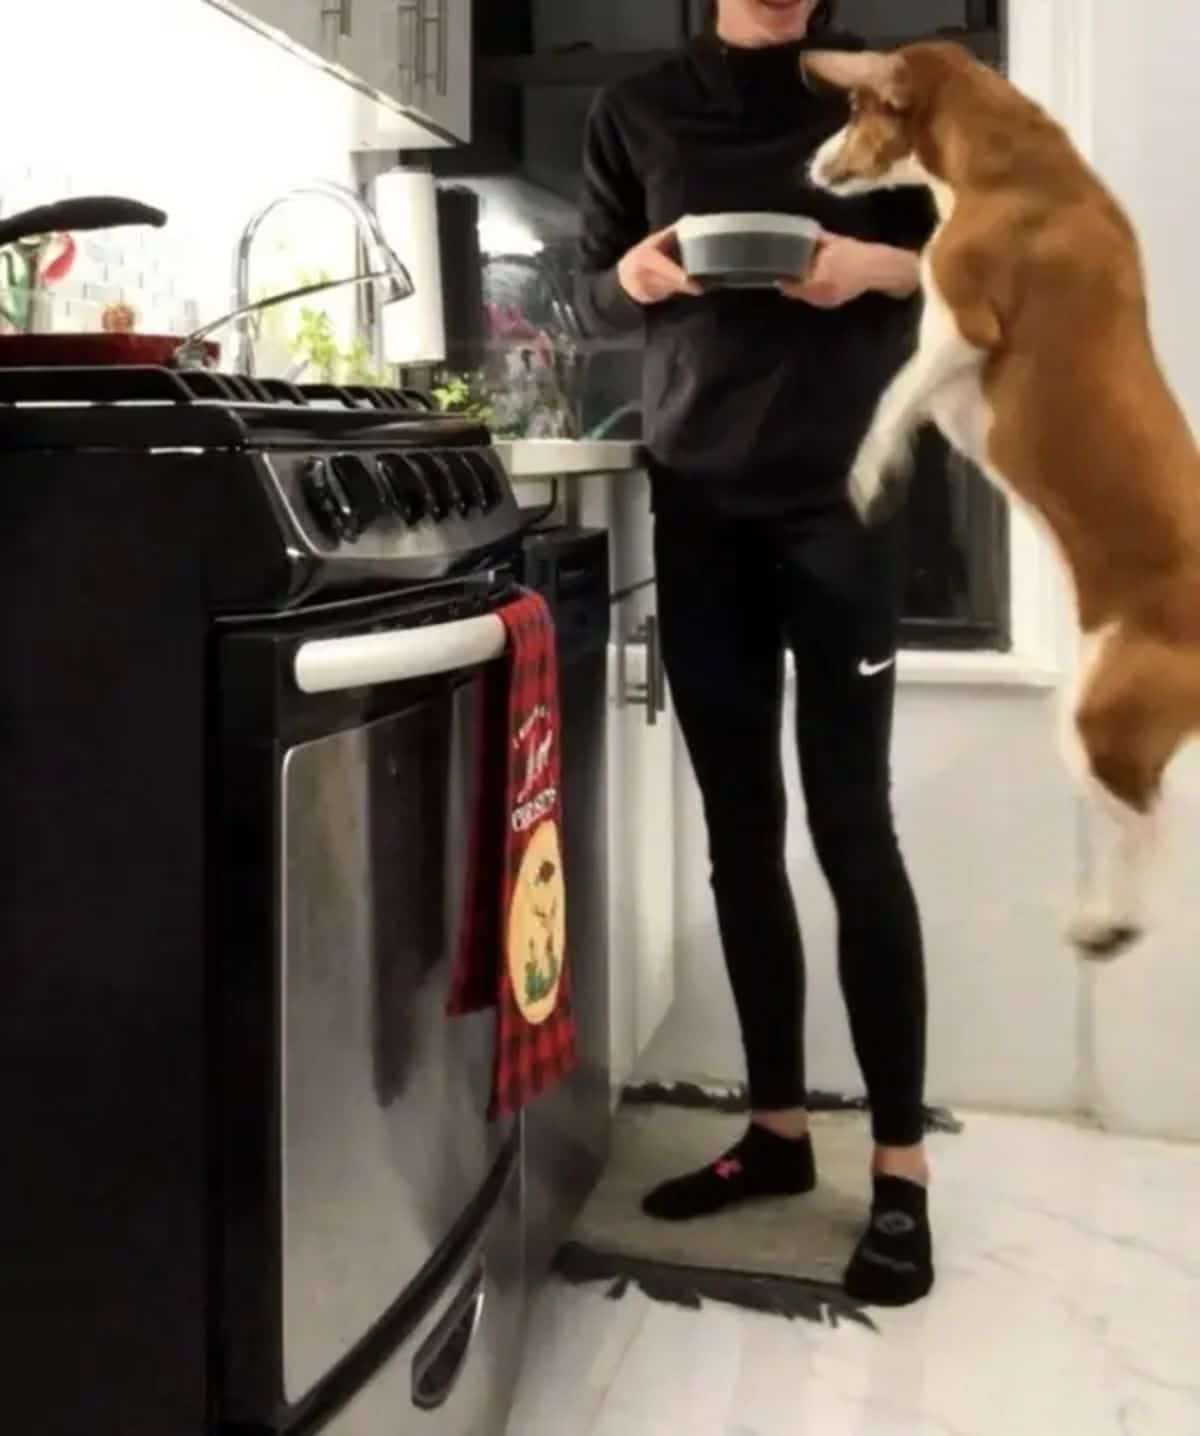 brown and white dog leaping up to reach a black and white dog bowl held by someone in a kitchen by a stove